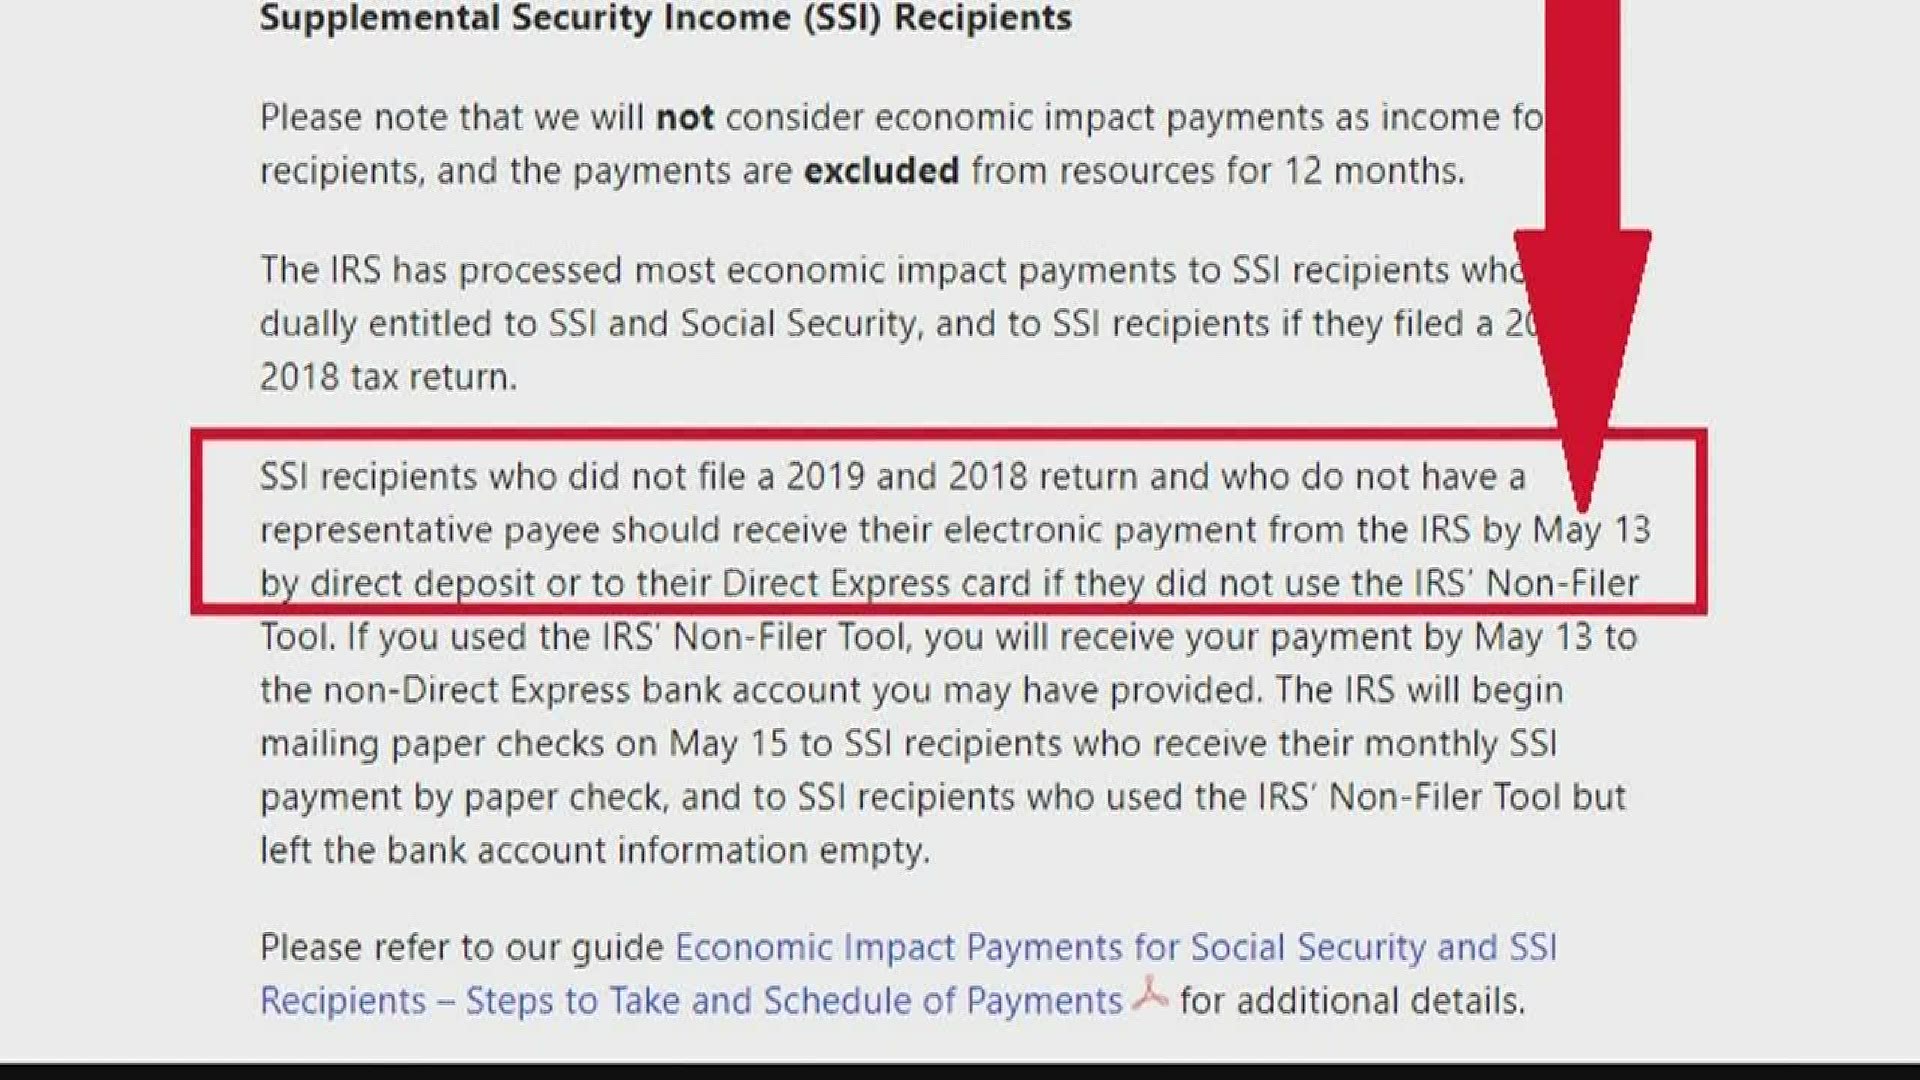 SSI recipients who did not file a 2019 and 2018 return should receive their electronic payment from the IRS by May 13 by direct deposit.